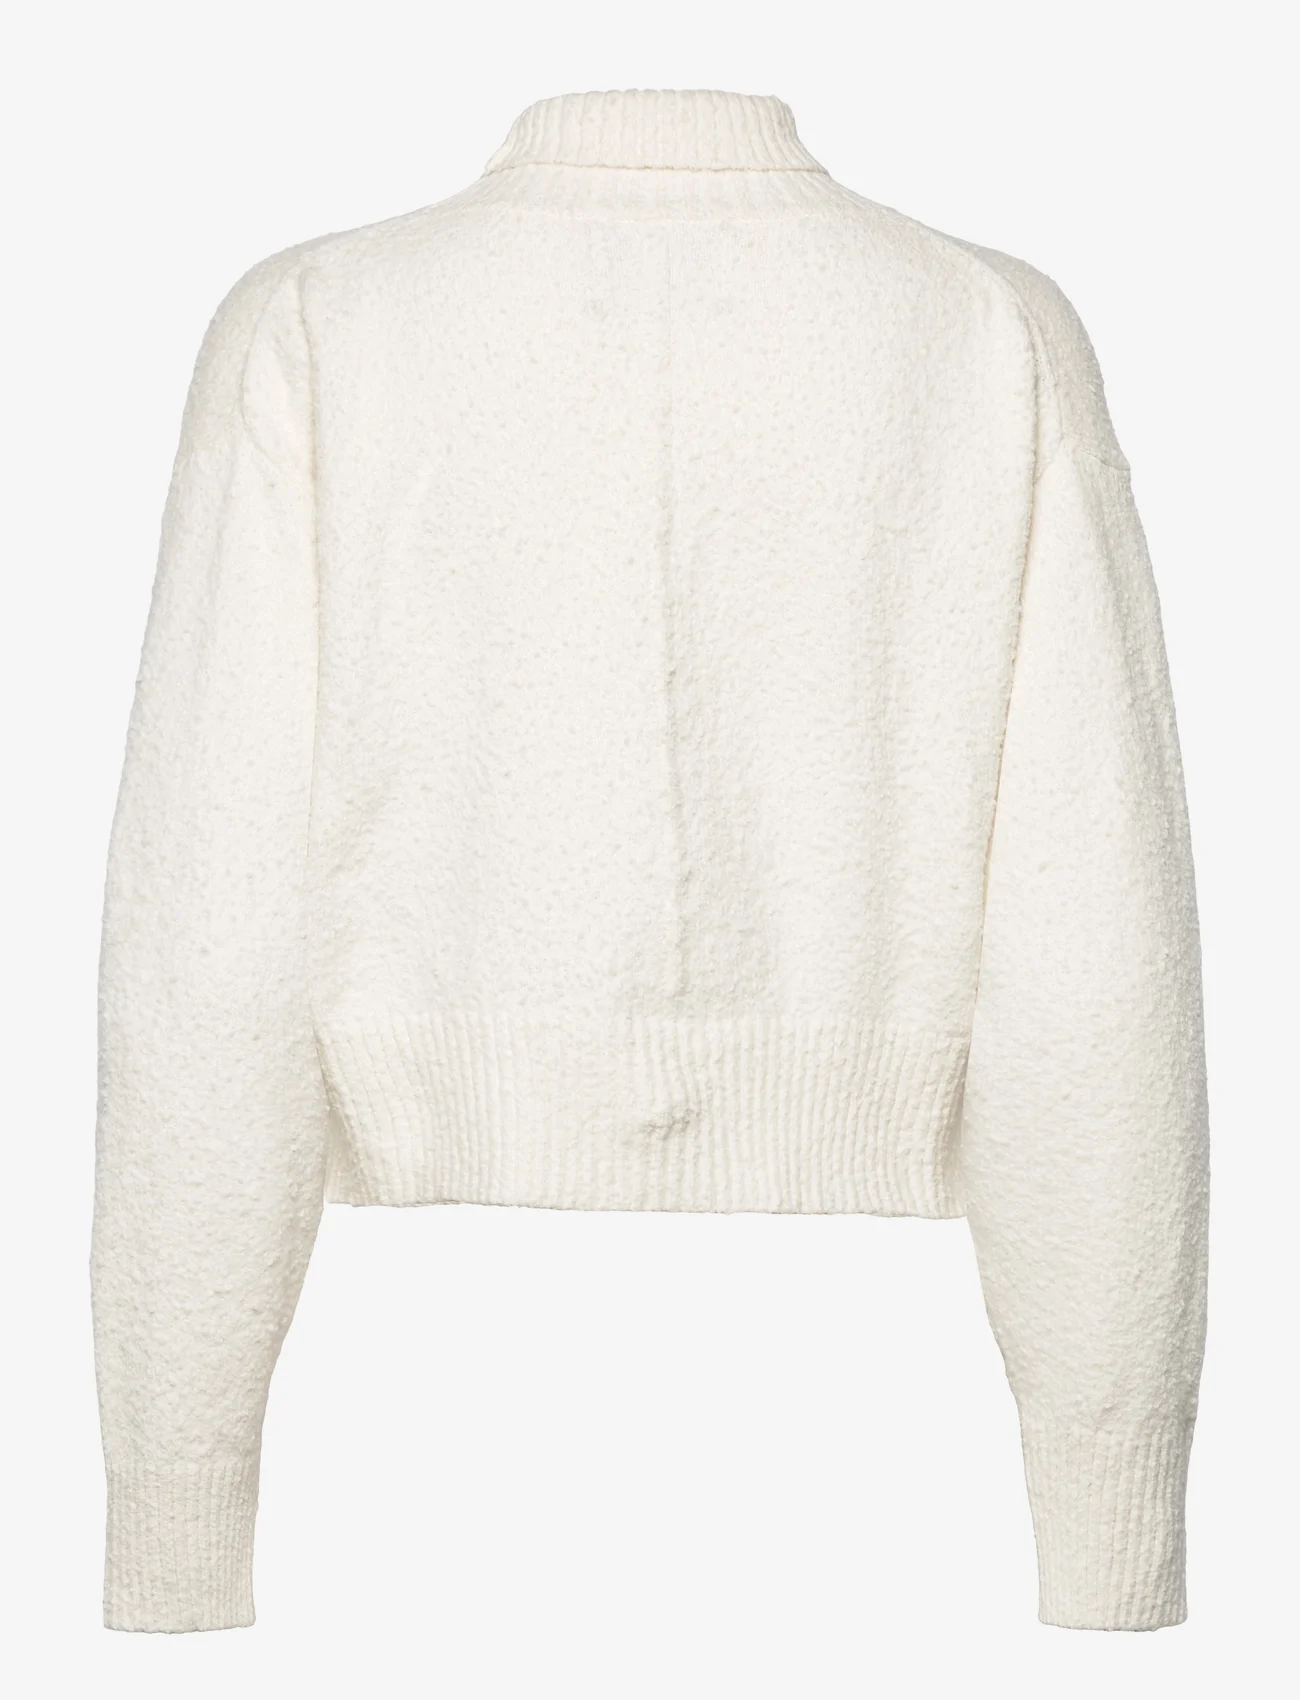 Calvin Klein Jeans - BOUCLE HIGH NECK SWEATER - truien - ivory - 1